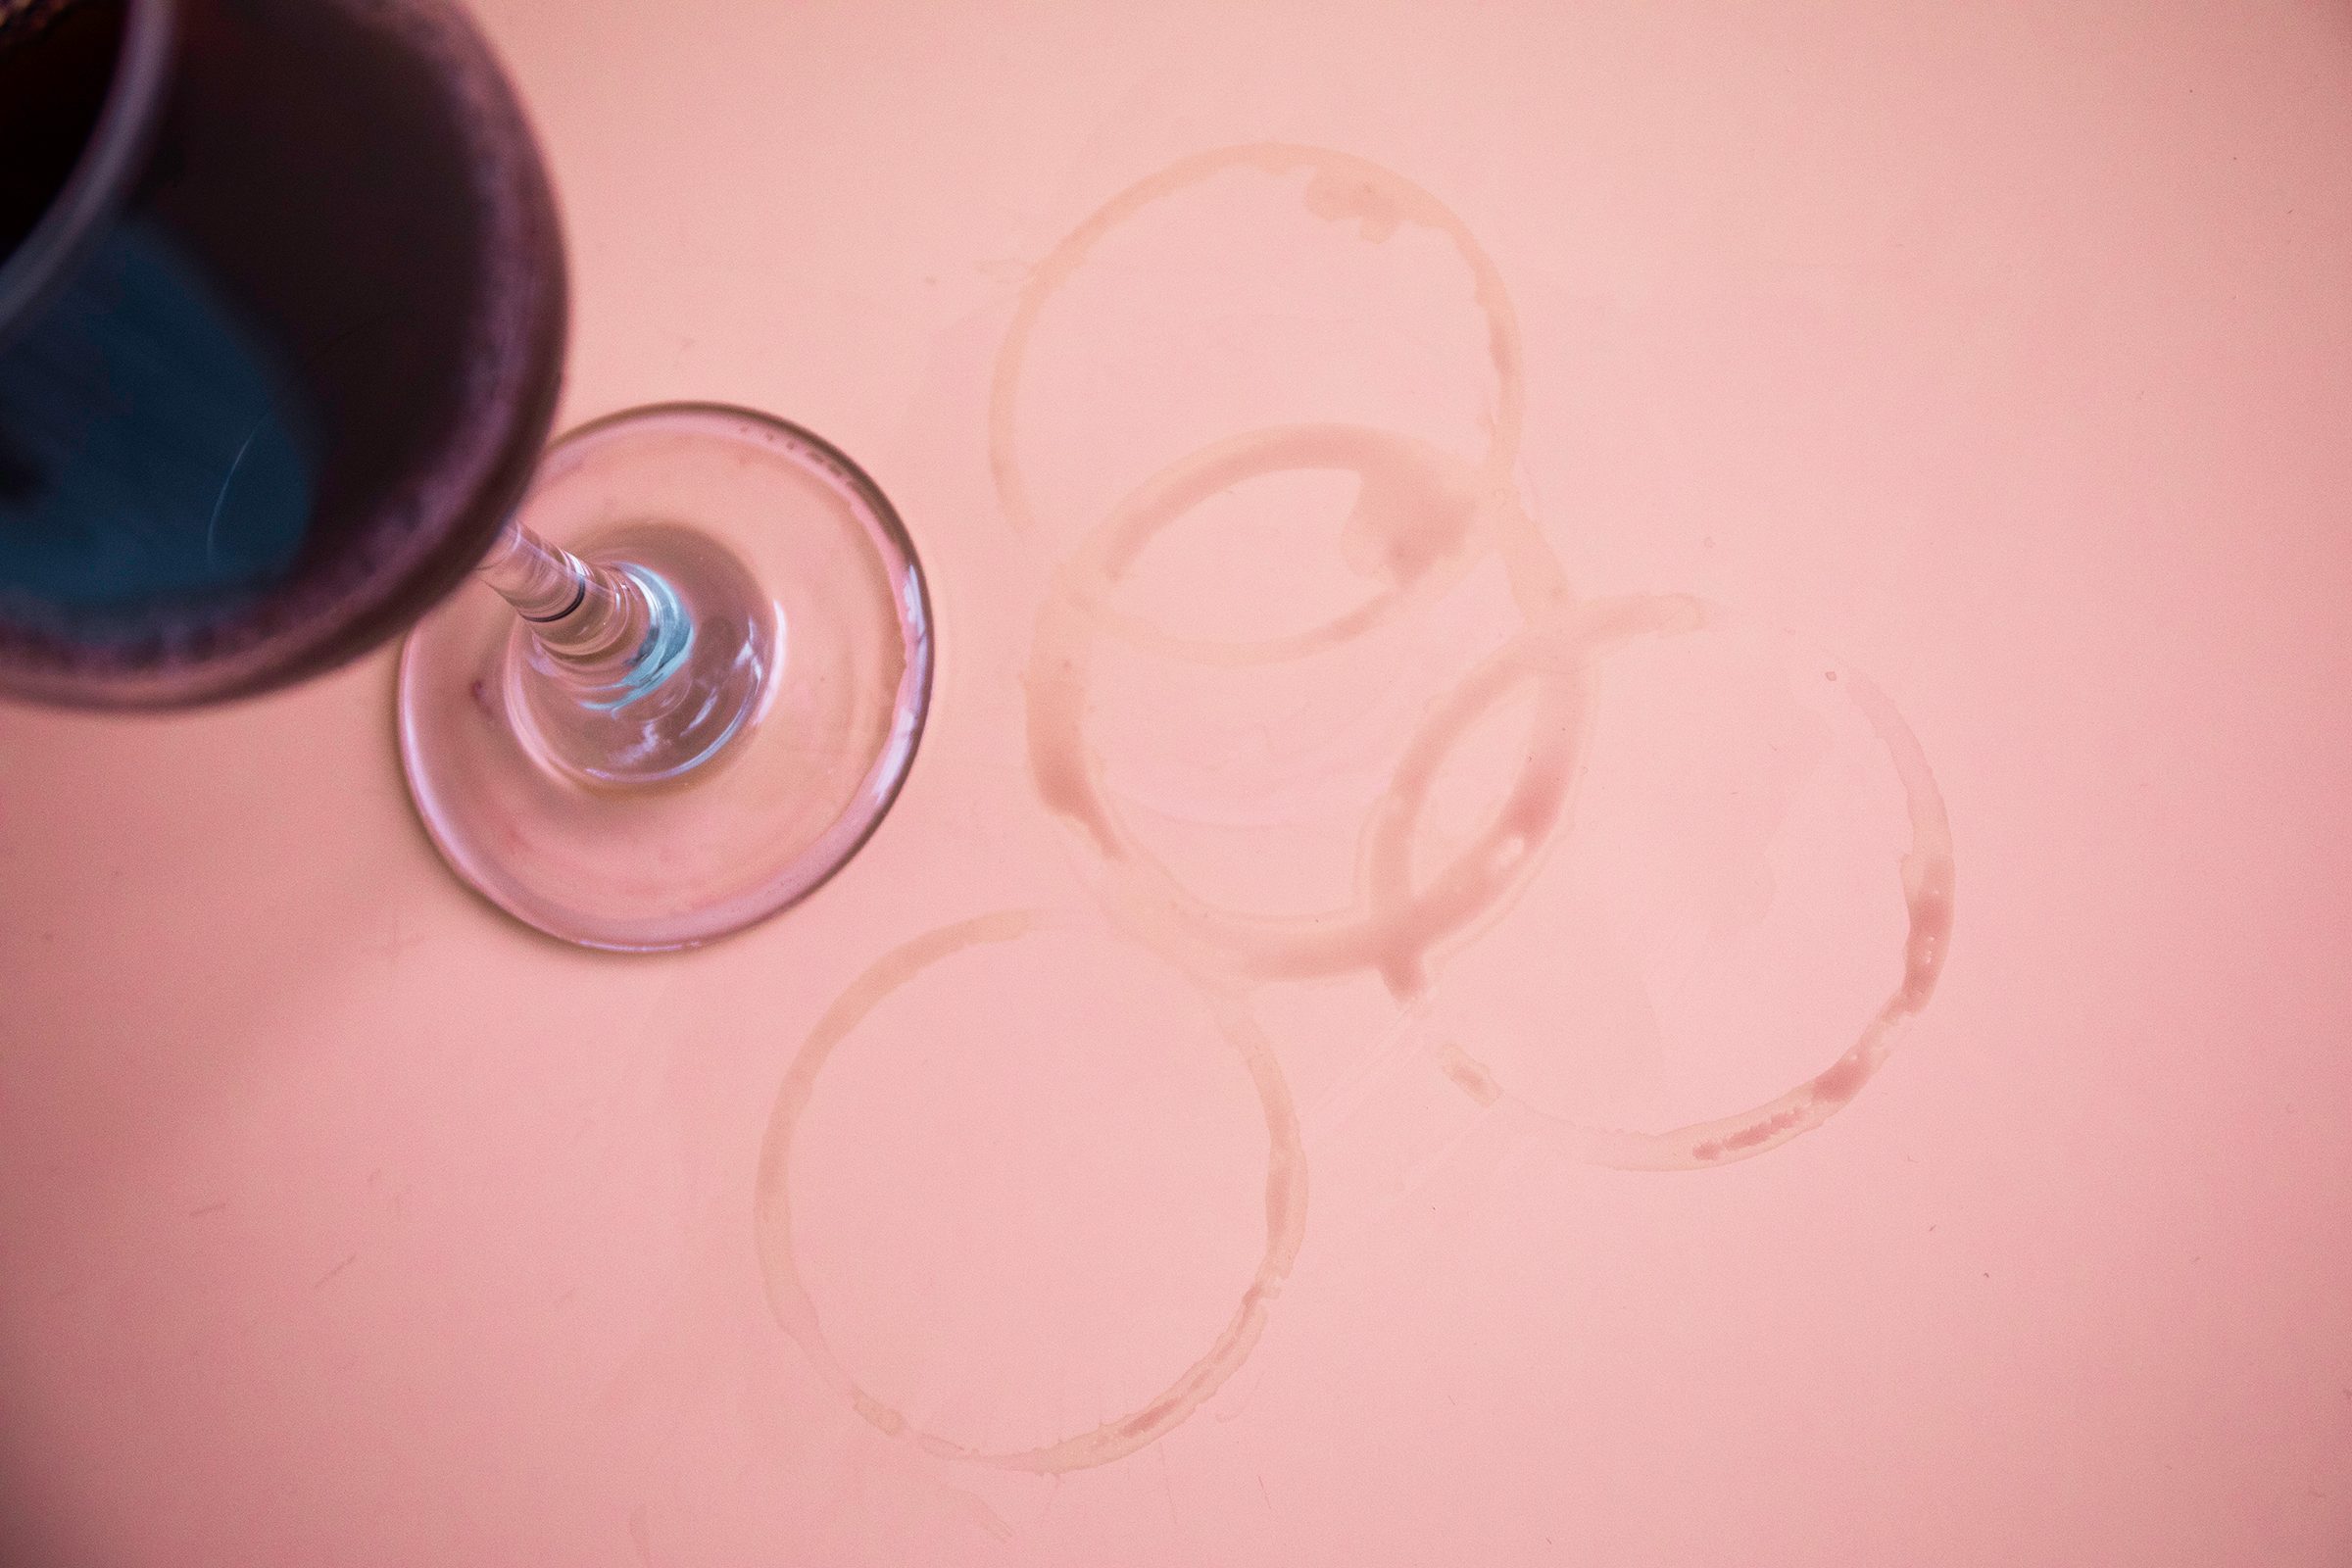 how to remove wine stains